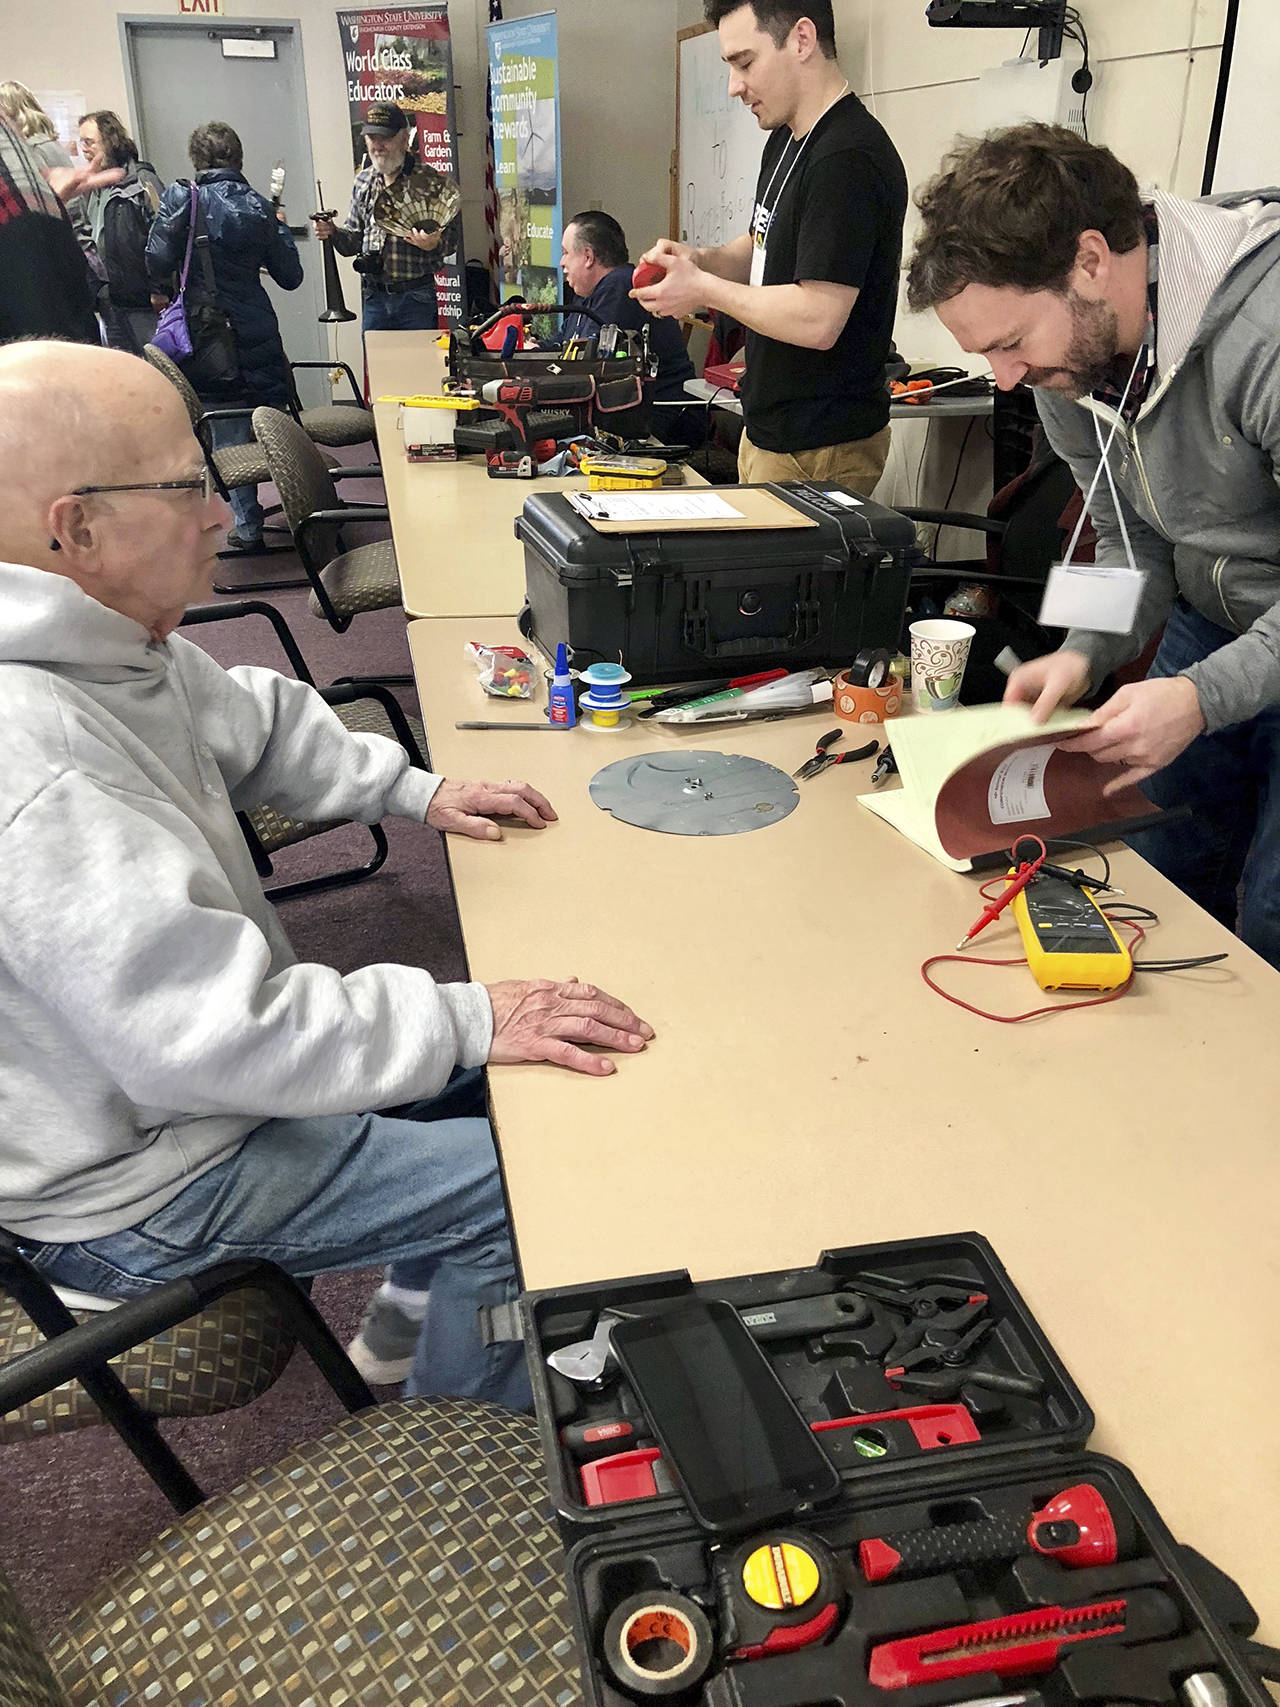 Volunteers donate time at the Repair Cafe, a free monthly event where people bring things to be fixed. It is hosted by WSU Snohomish County Extension in McCollum Park.